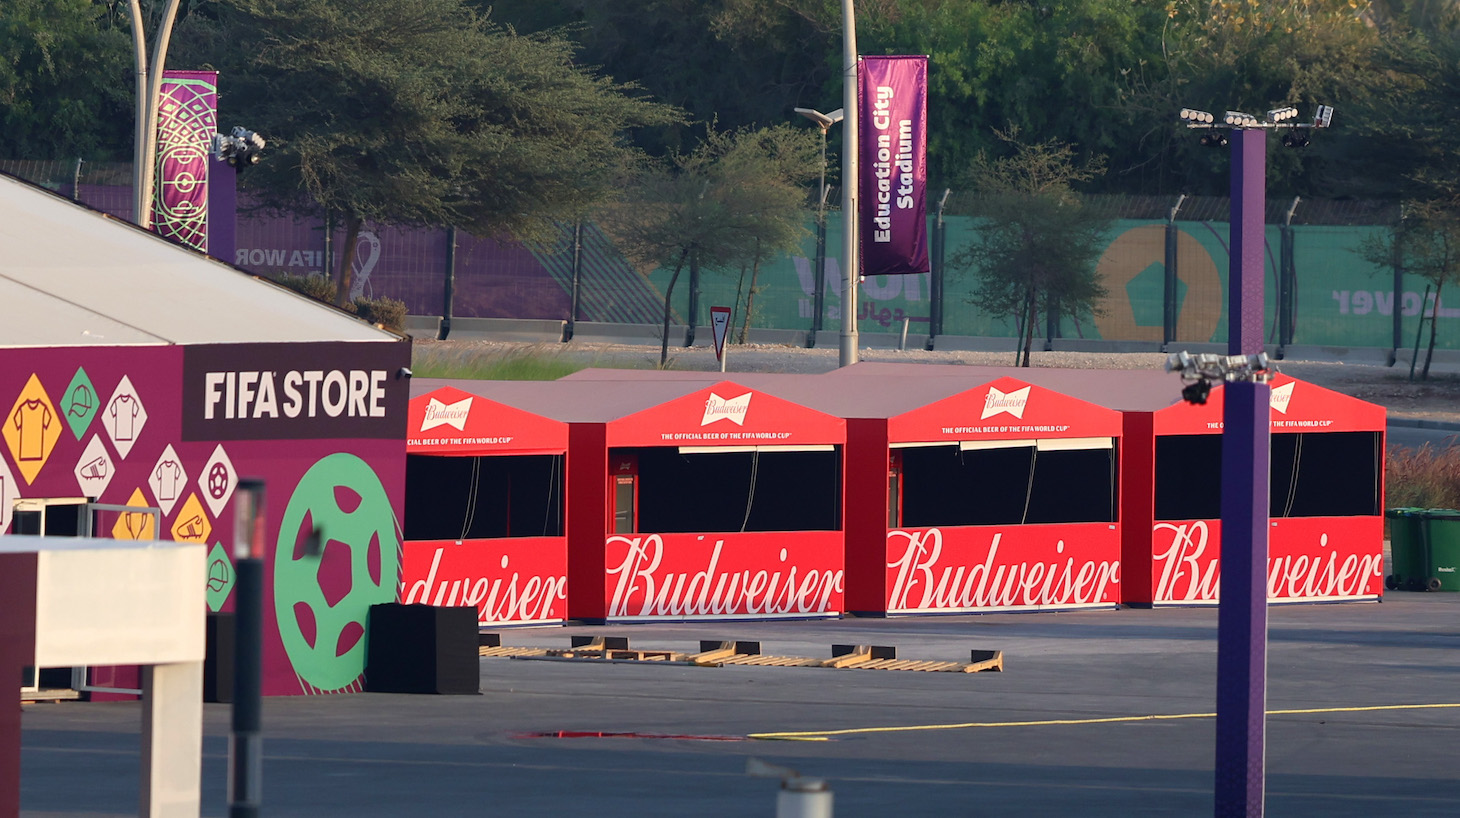 An empty Budweiser beer stand at Fan Festival ahead of the FIFA World Cup Qatar 2022 on November 18, 2022 in Doha, Qatar.